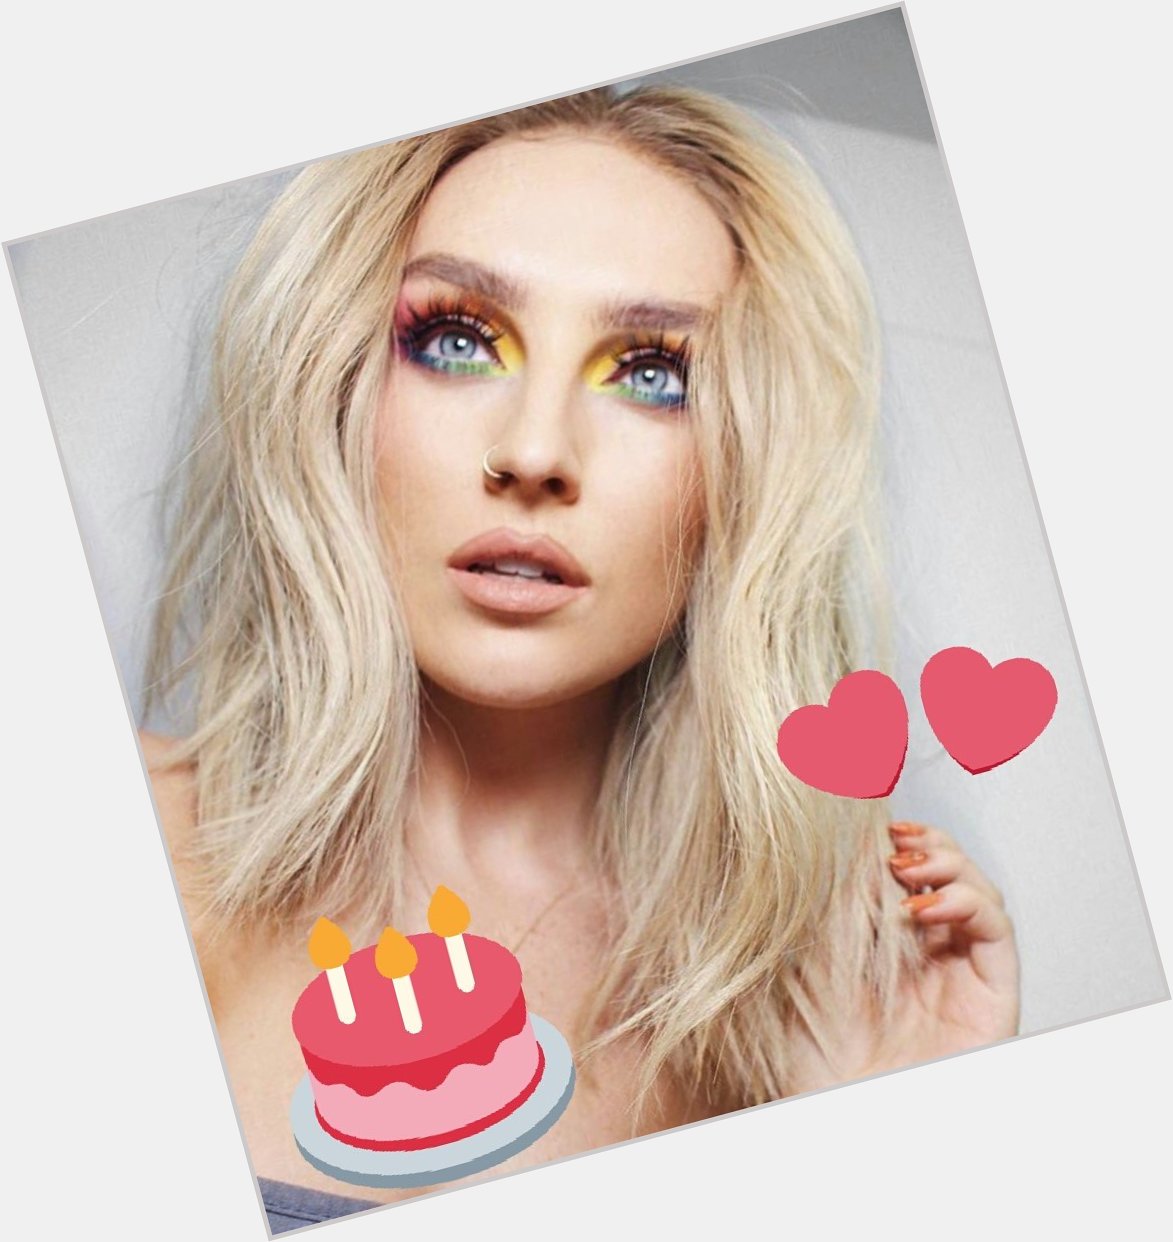 HAPPY BIRTHDAY TO MY QUEEN PERRIE EDWARDS I LOVE YOU 